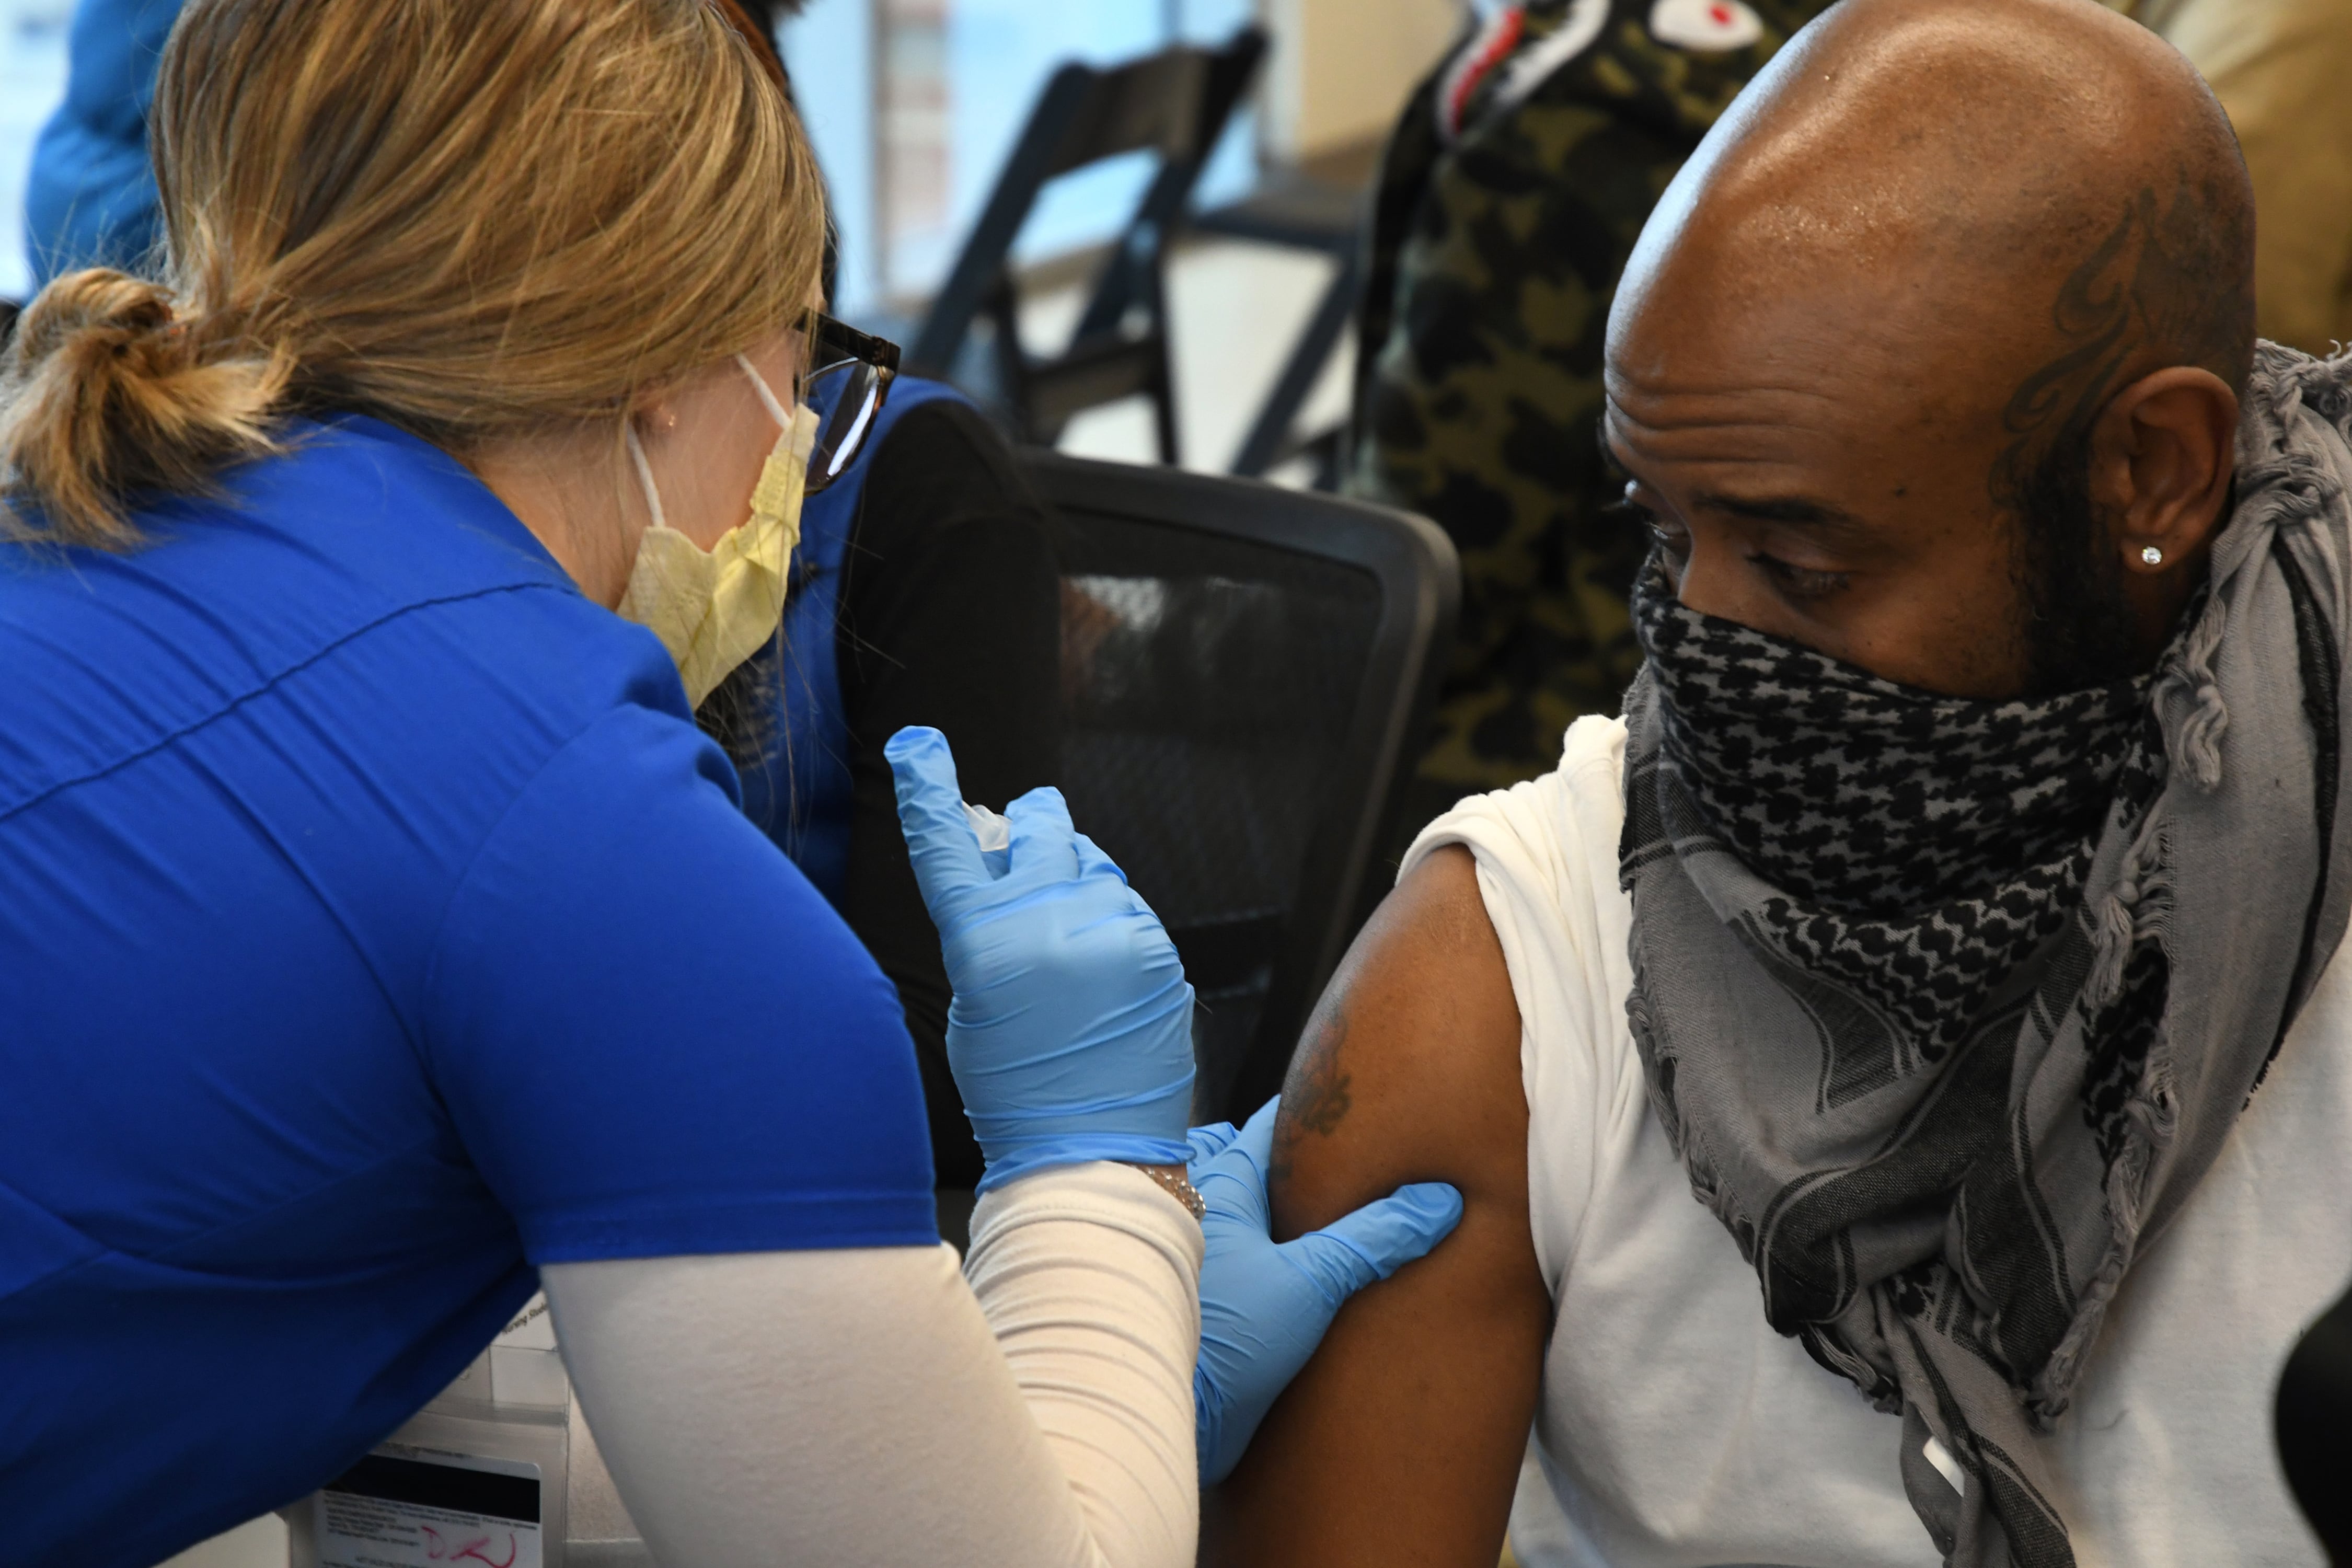 A woman wearing gloves and a mask gives a vaccine to a man wearing a mask.